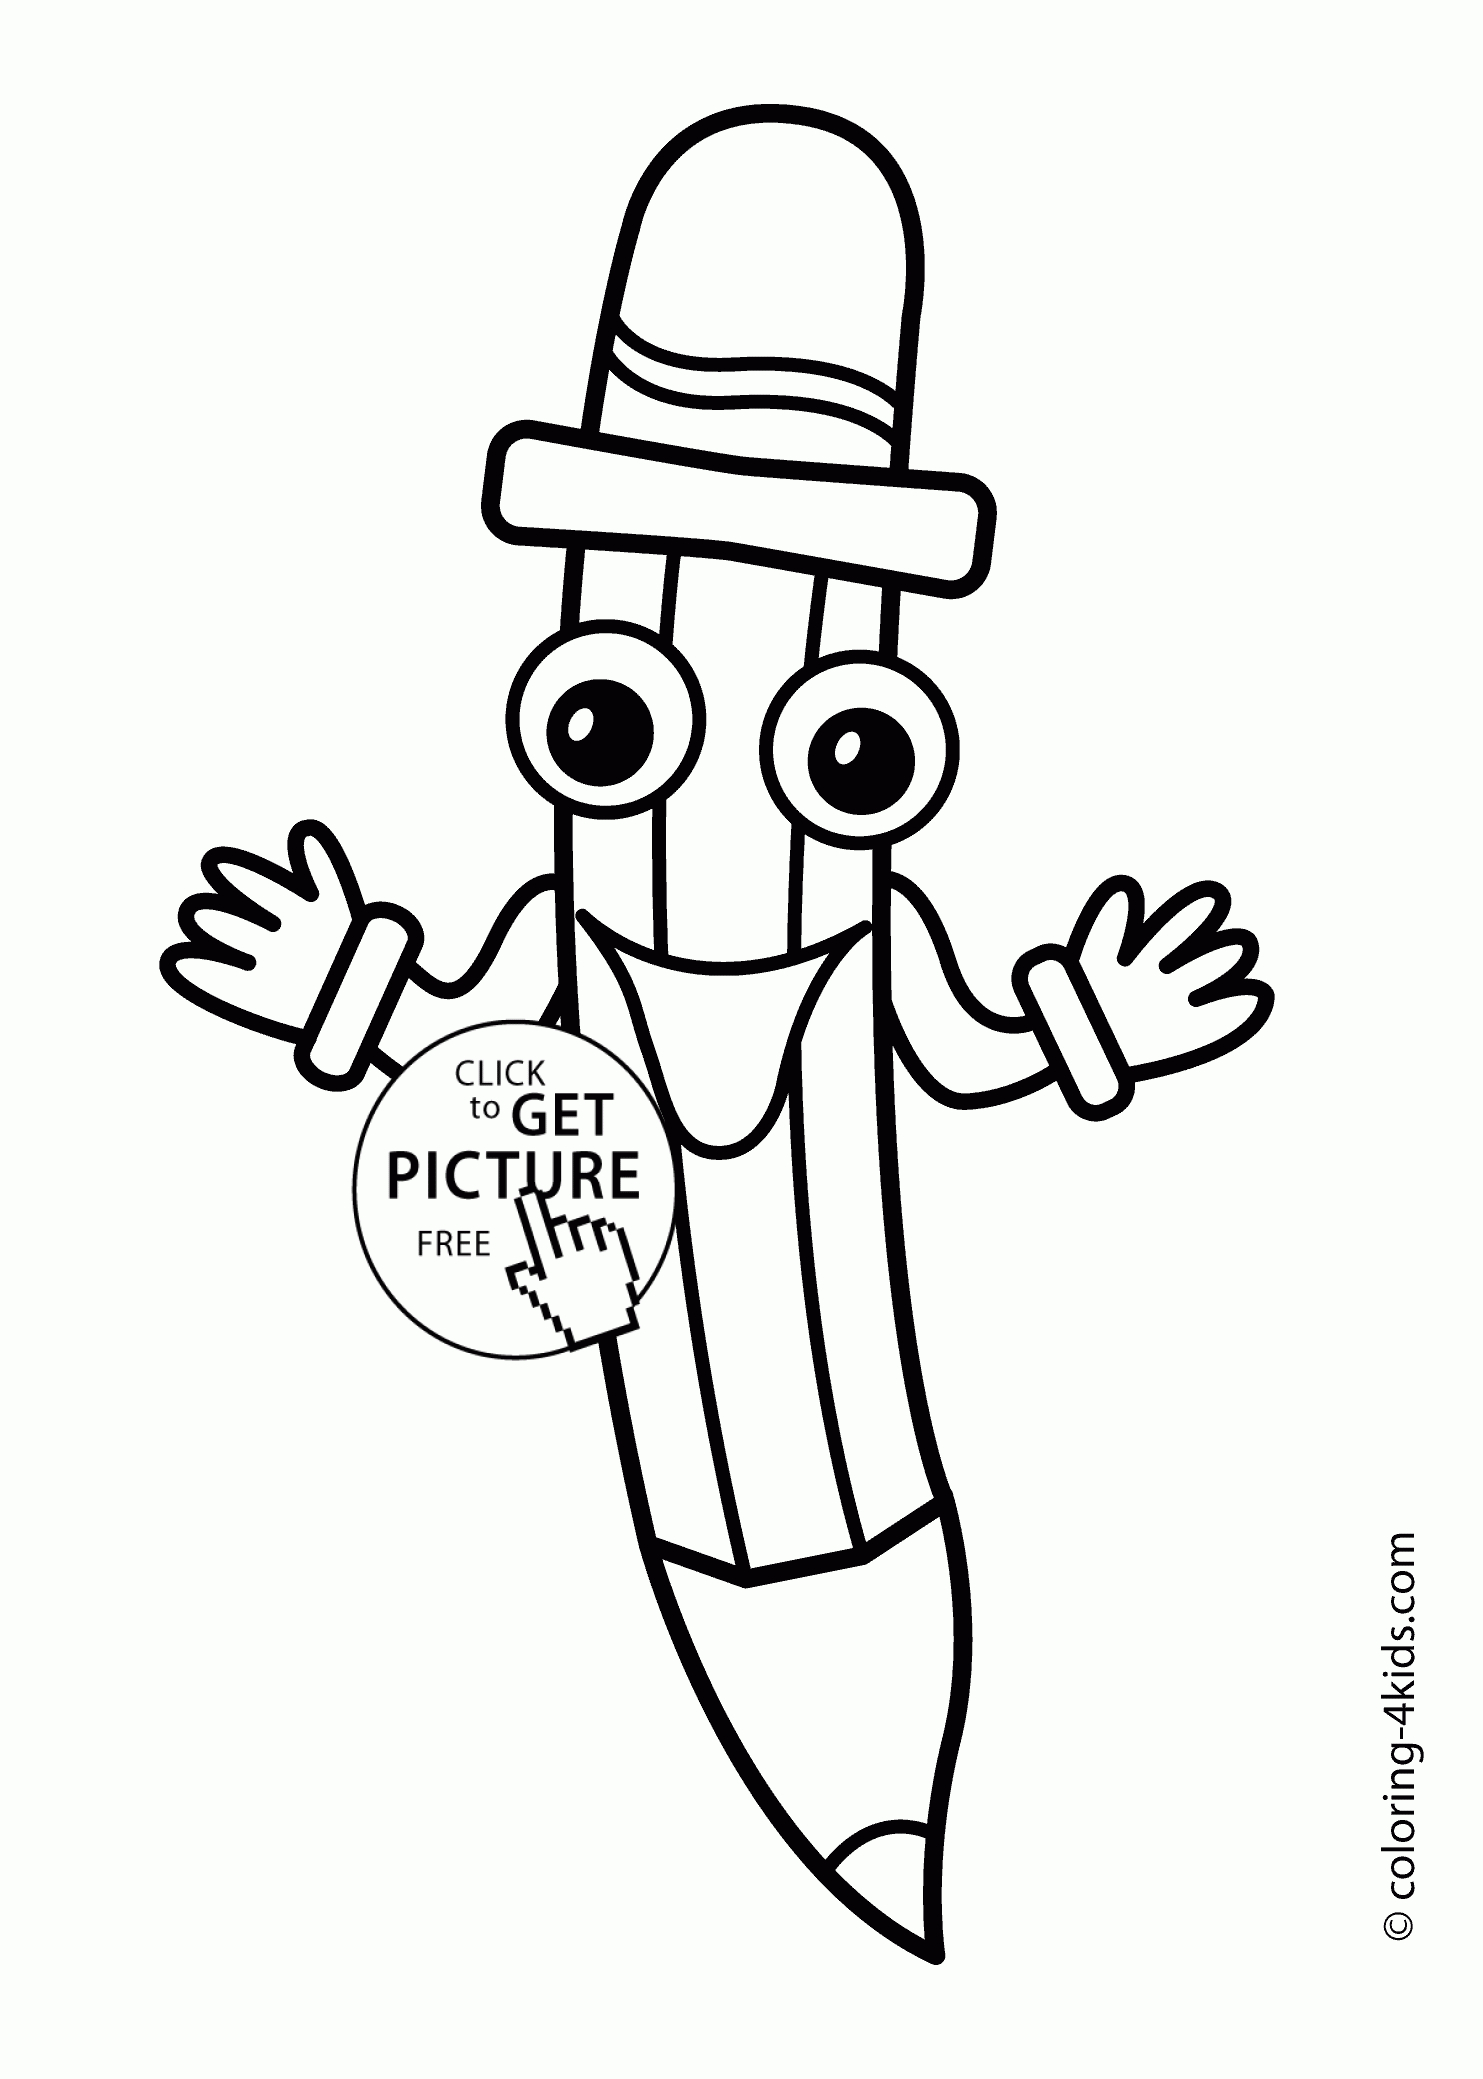 Coloring Pages : School Pencil Man Coloring Page Classes For Kids - Free Printable Pencil Drawings